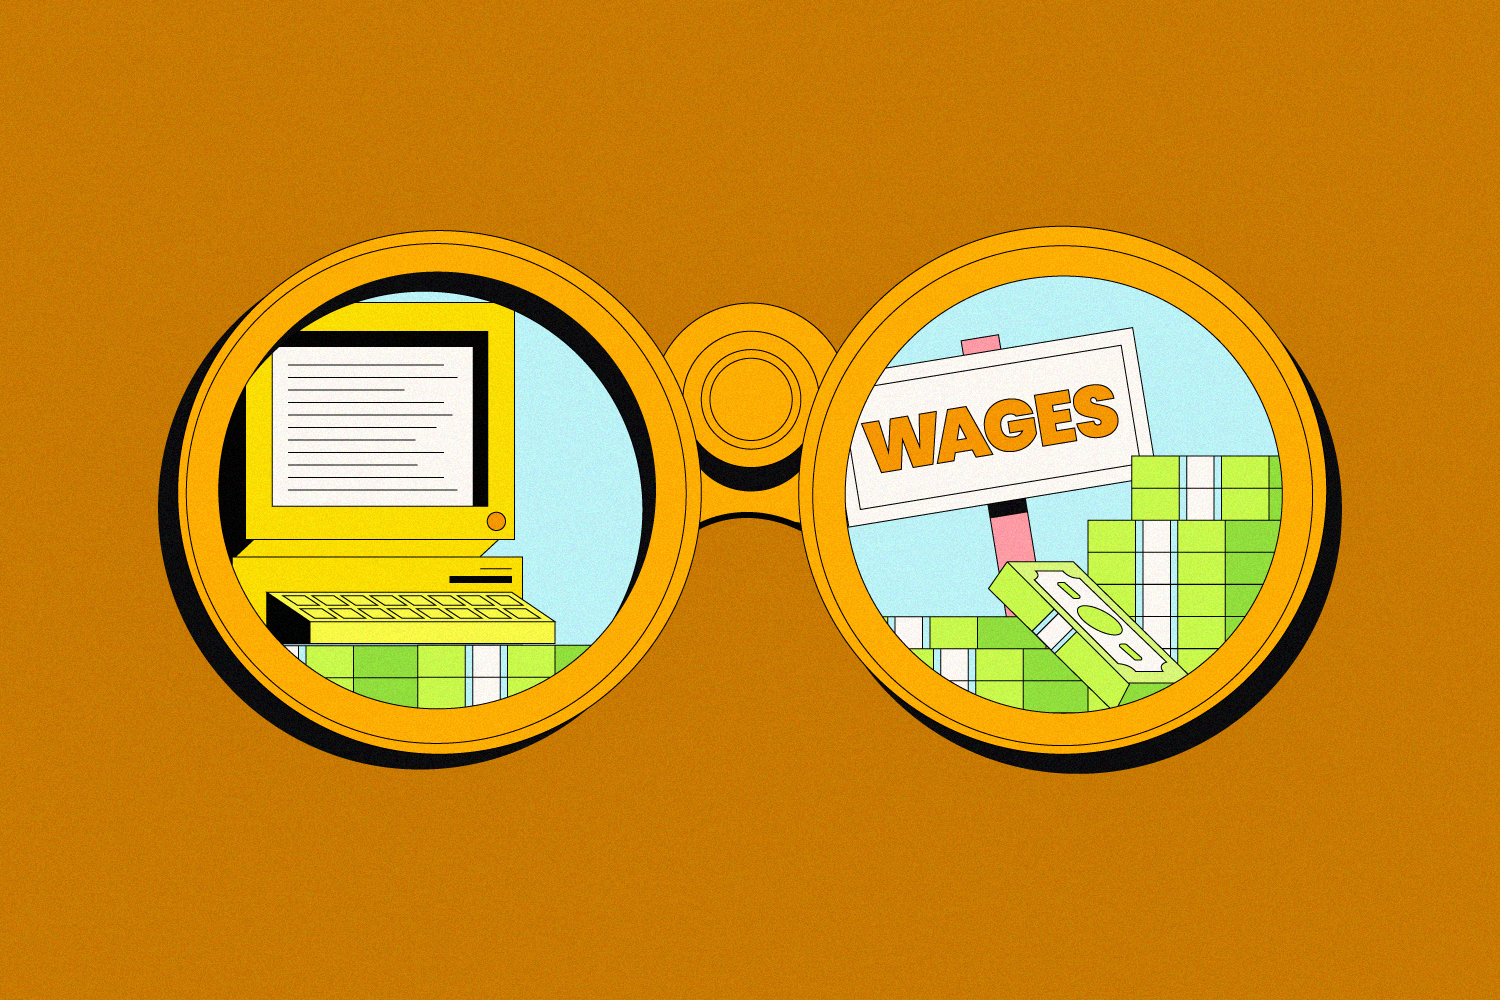 Binoculars with a retro computer and "Wages" sign in the eye holes sitting on stacks of money on a dark orange and brown background